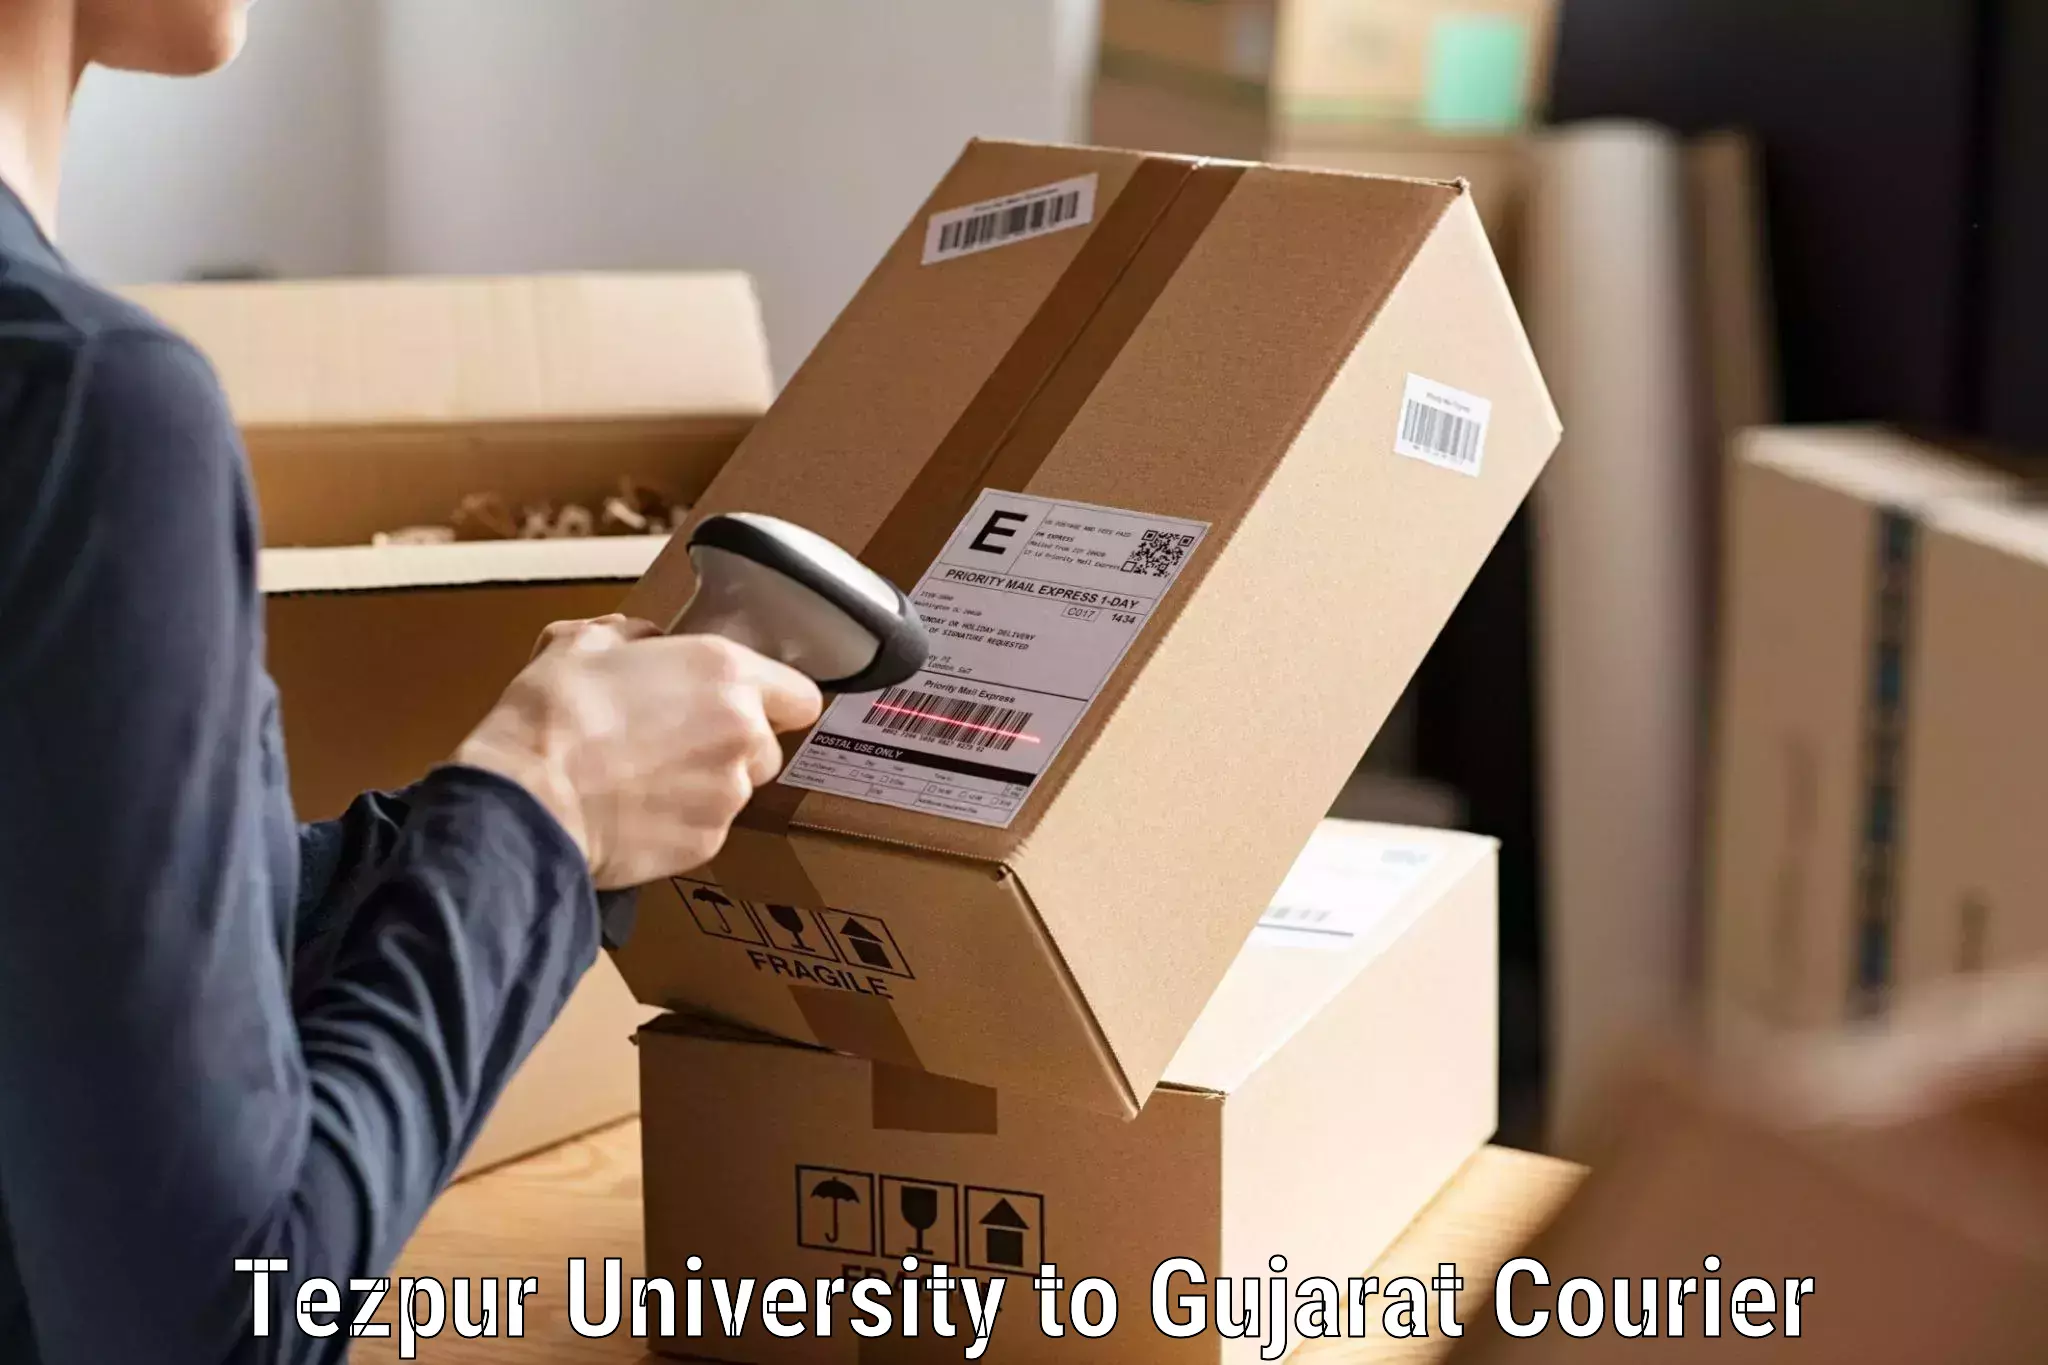 Ocean freight courier Tezpur University to Ahmedabad